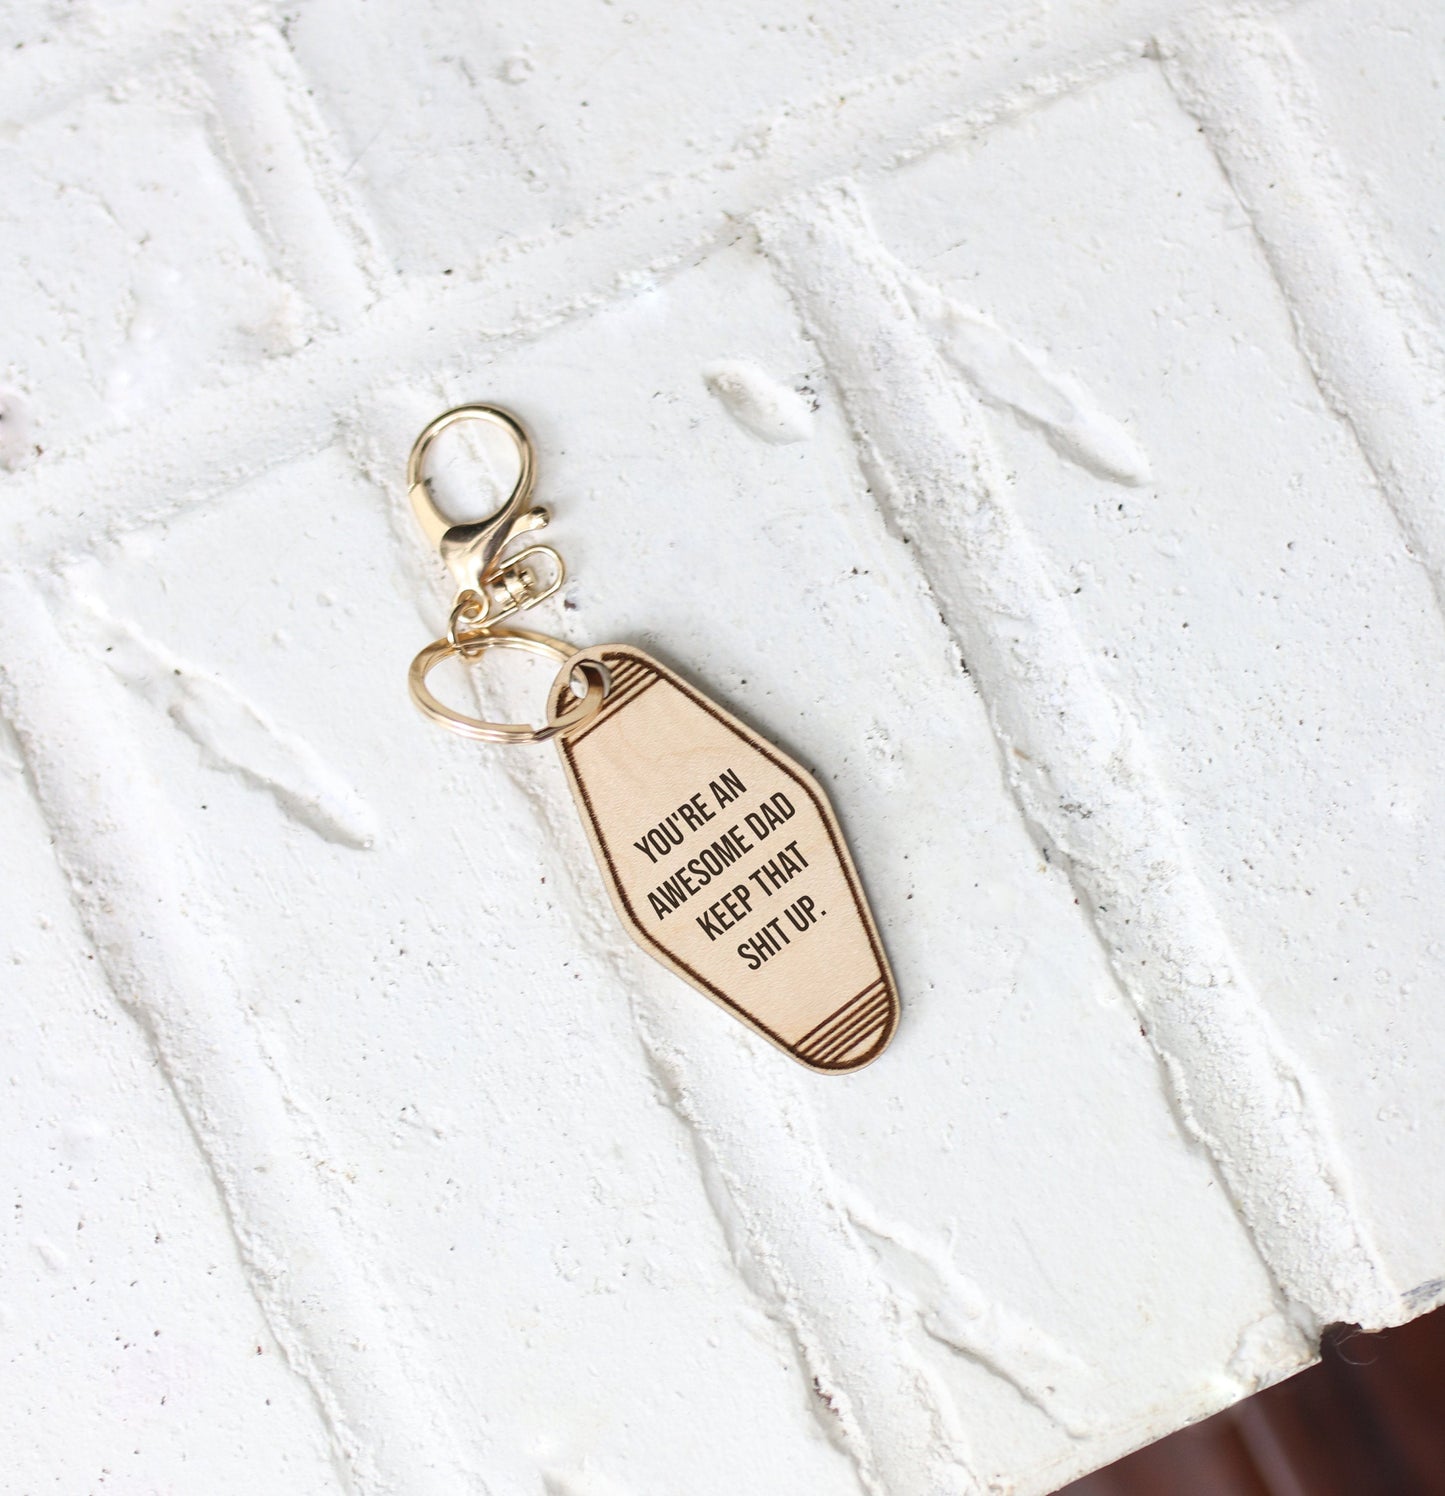 Funny Dad Keychain, You're An Awesome Dad, Engraved Wood Key Ring, Dad Gift, Father's Day Gift, Gift for Dad, Retro Motel Style Keychain